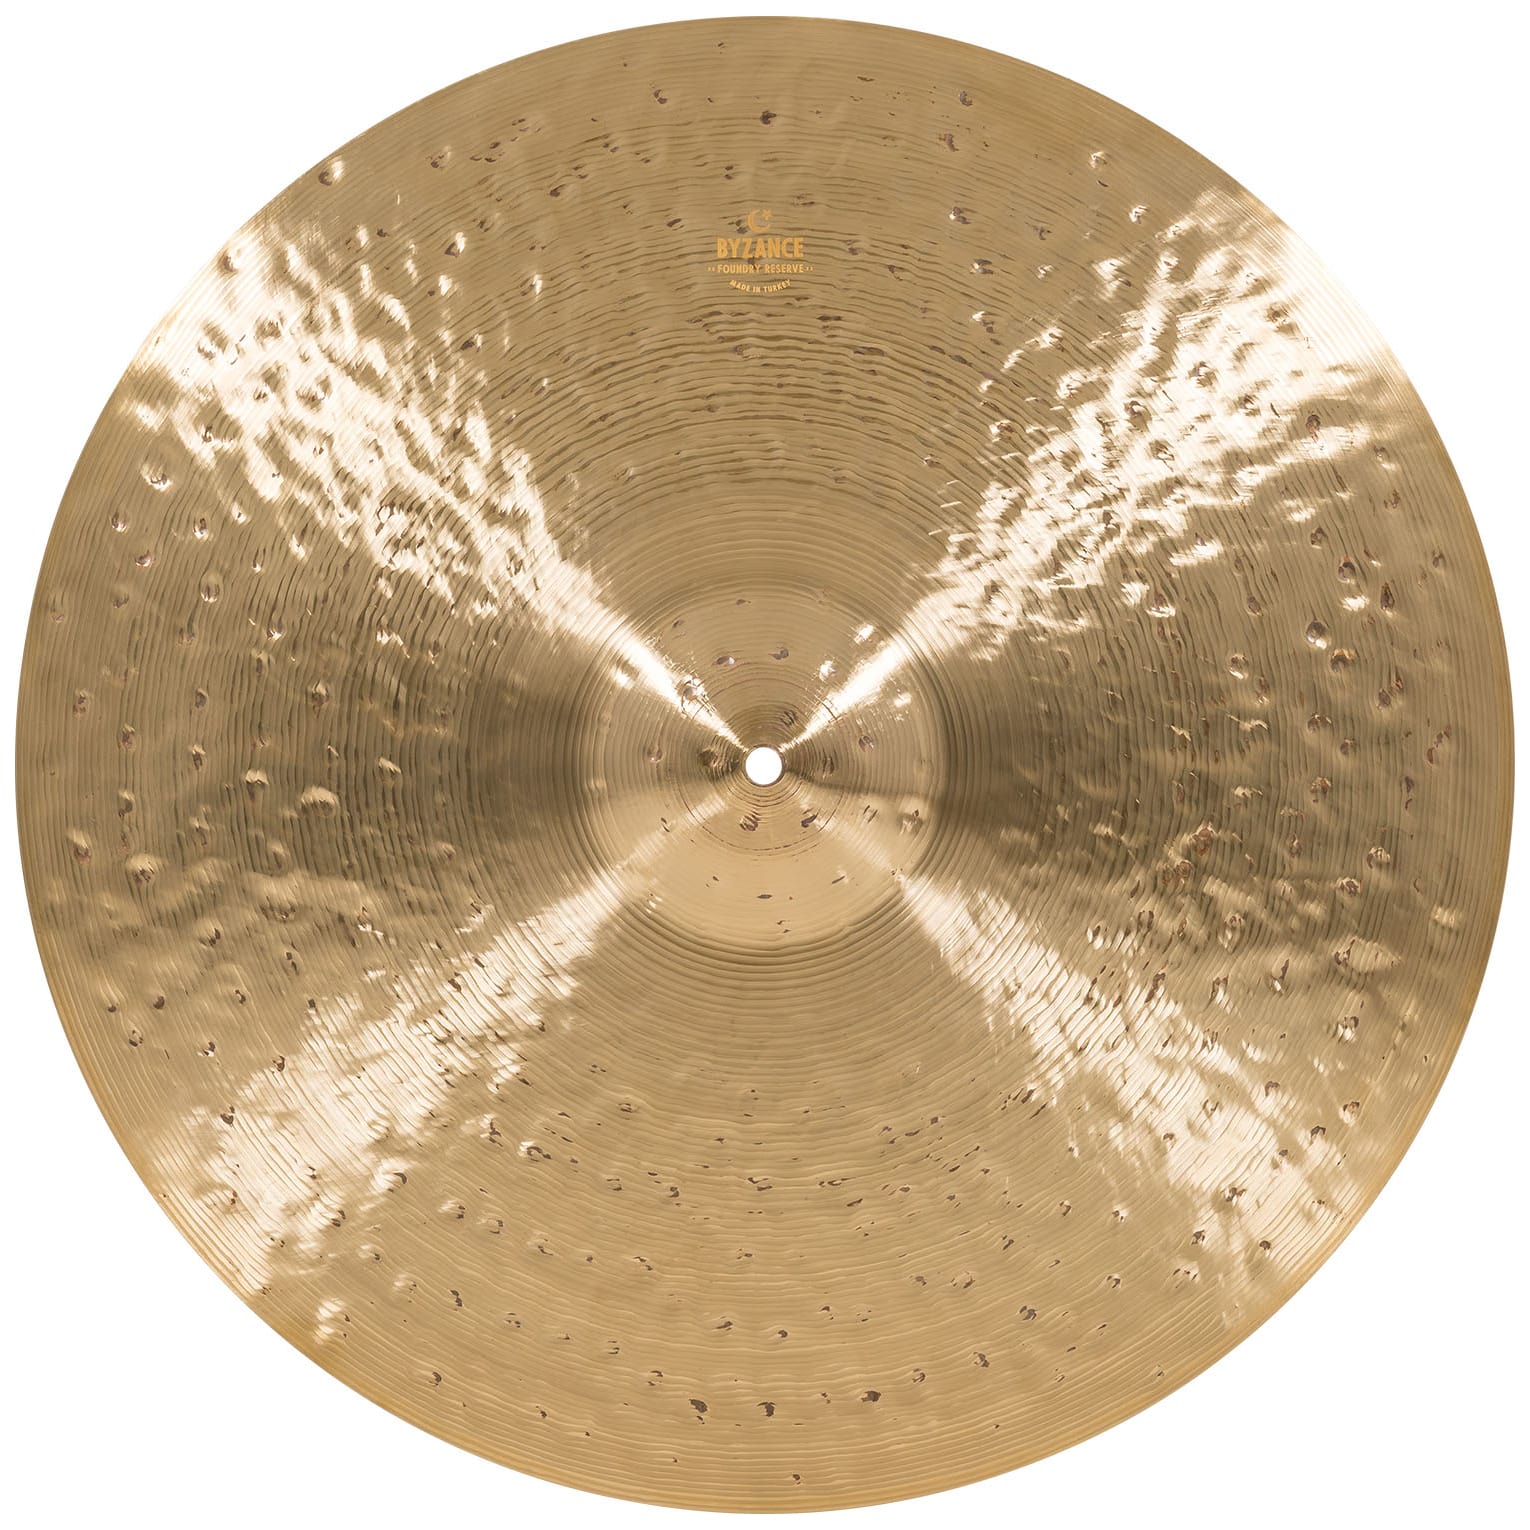 Meinl Cymbals B22FRR - 22" Byzance Foundry Reserve Ride 